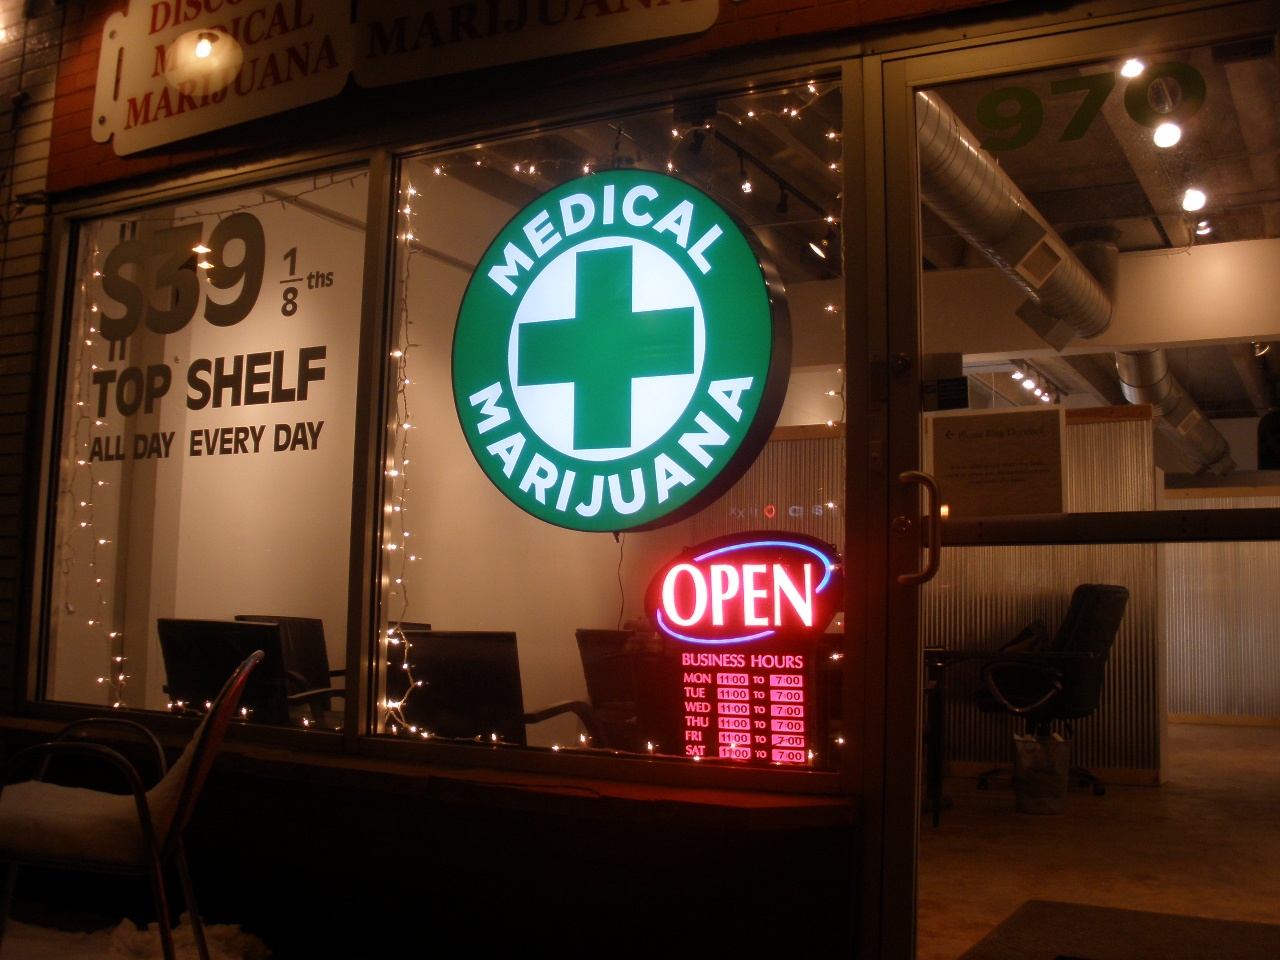 In the News: No DUI Changes for Arizona Medical Marijuana Users